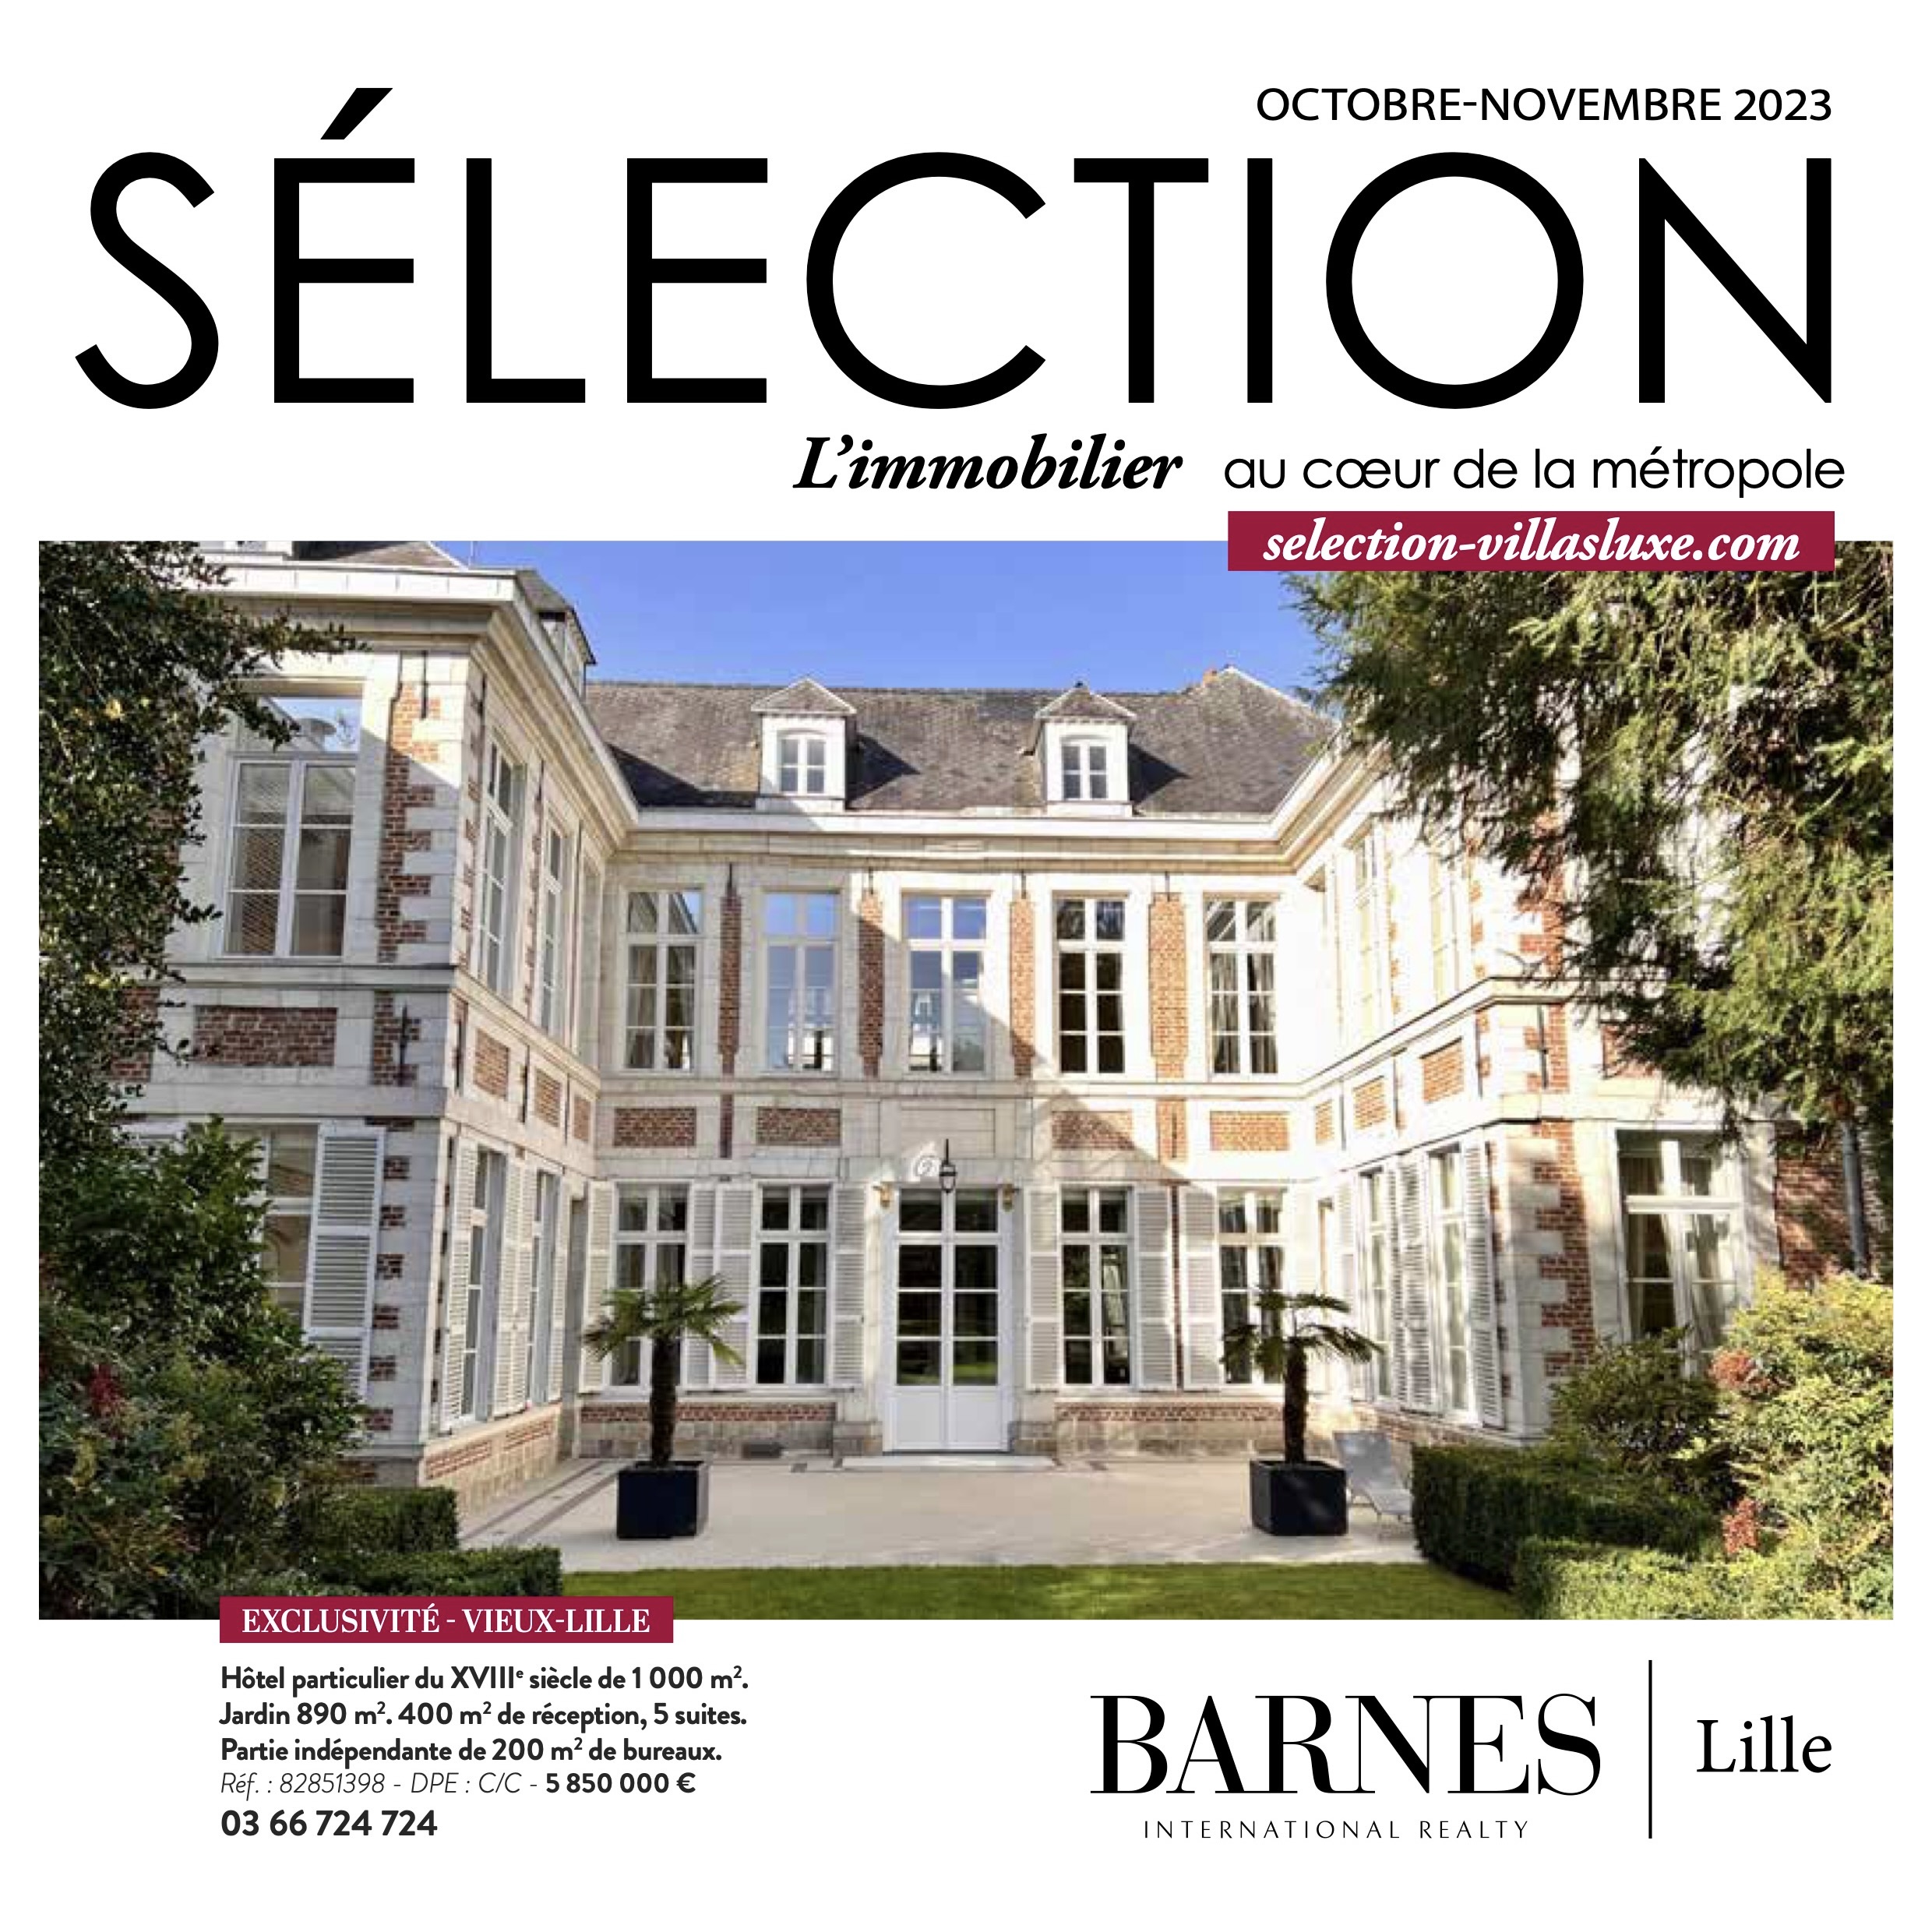 BARNES Lille in the new SELECTION